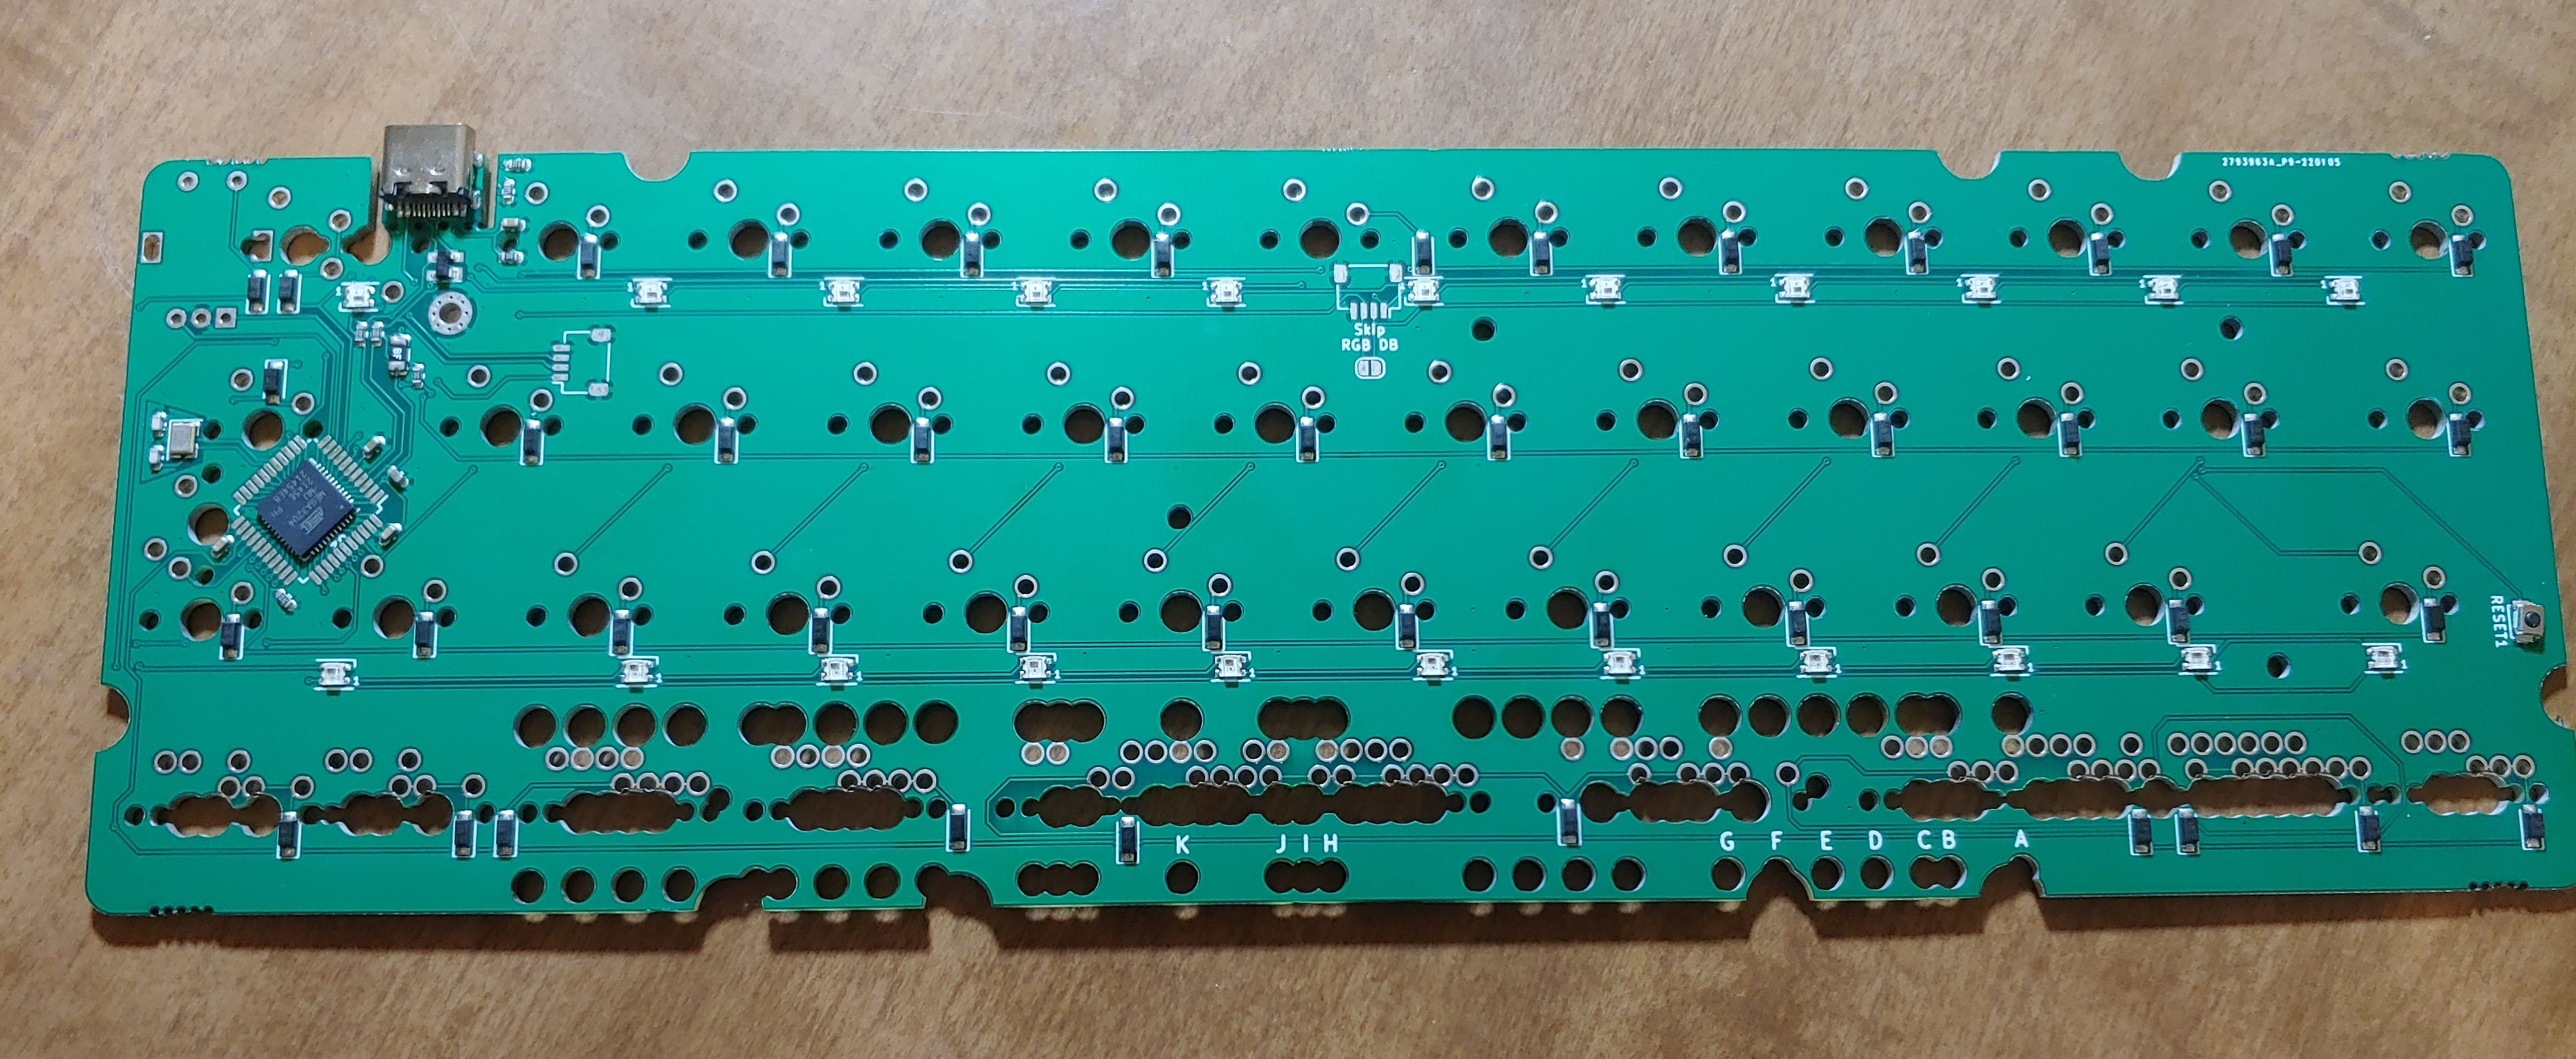 Back of a prototype Omnibus r4 PCB with the mounting tabs removed